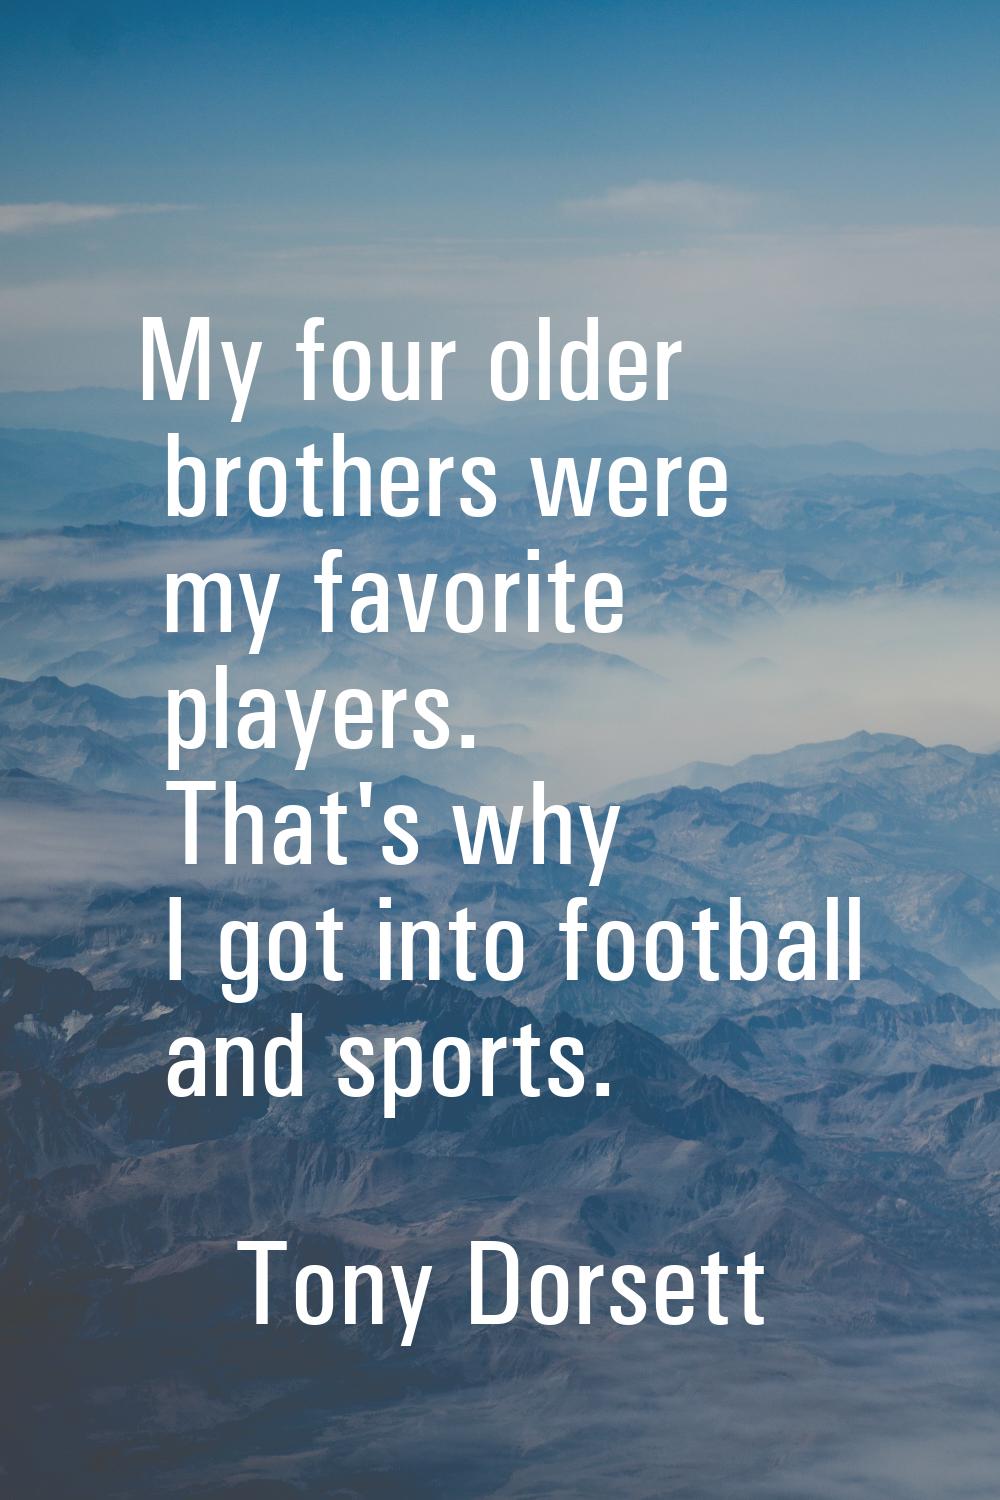 My four older brothers were my favorite players. That's why I got into football and sports.